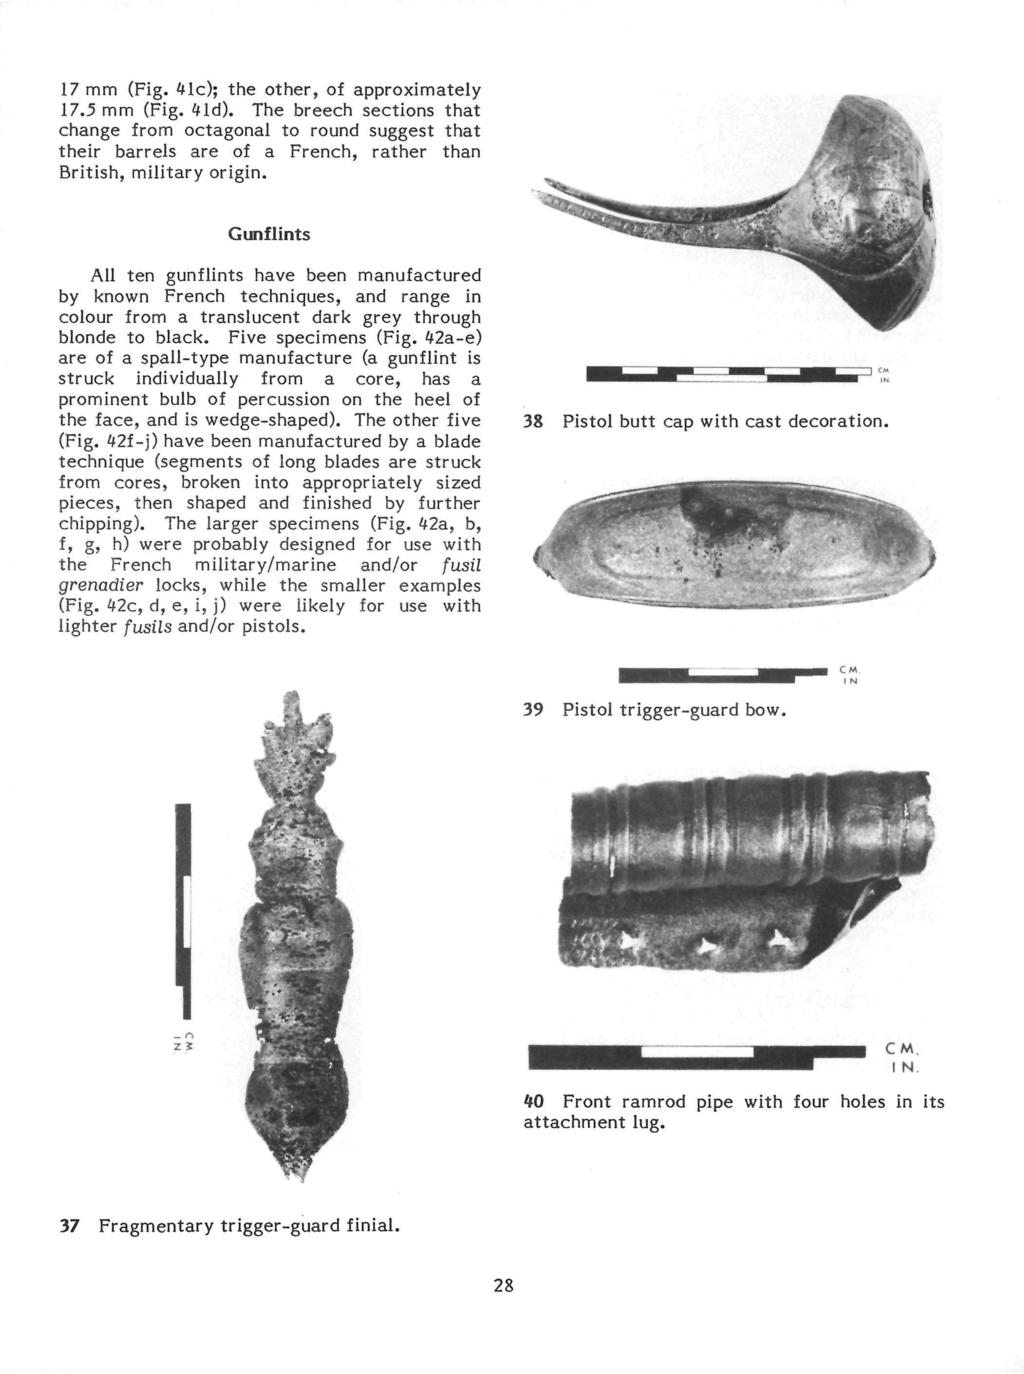 17 mm (Fig. 41c); the other, of approximately 17.5 mm (Fig. 4Id).